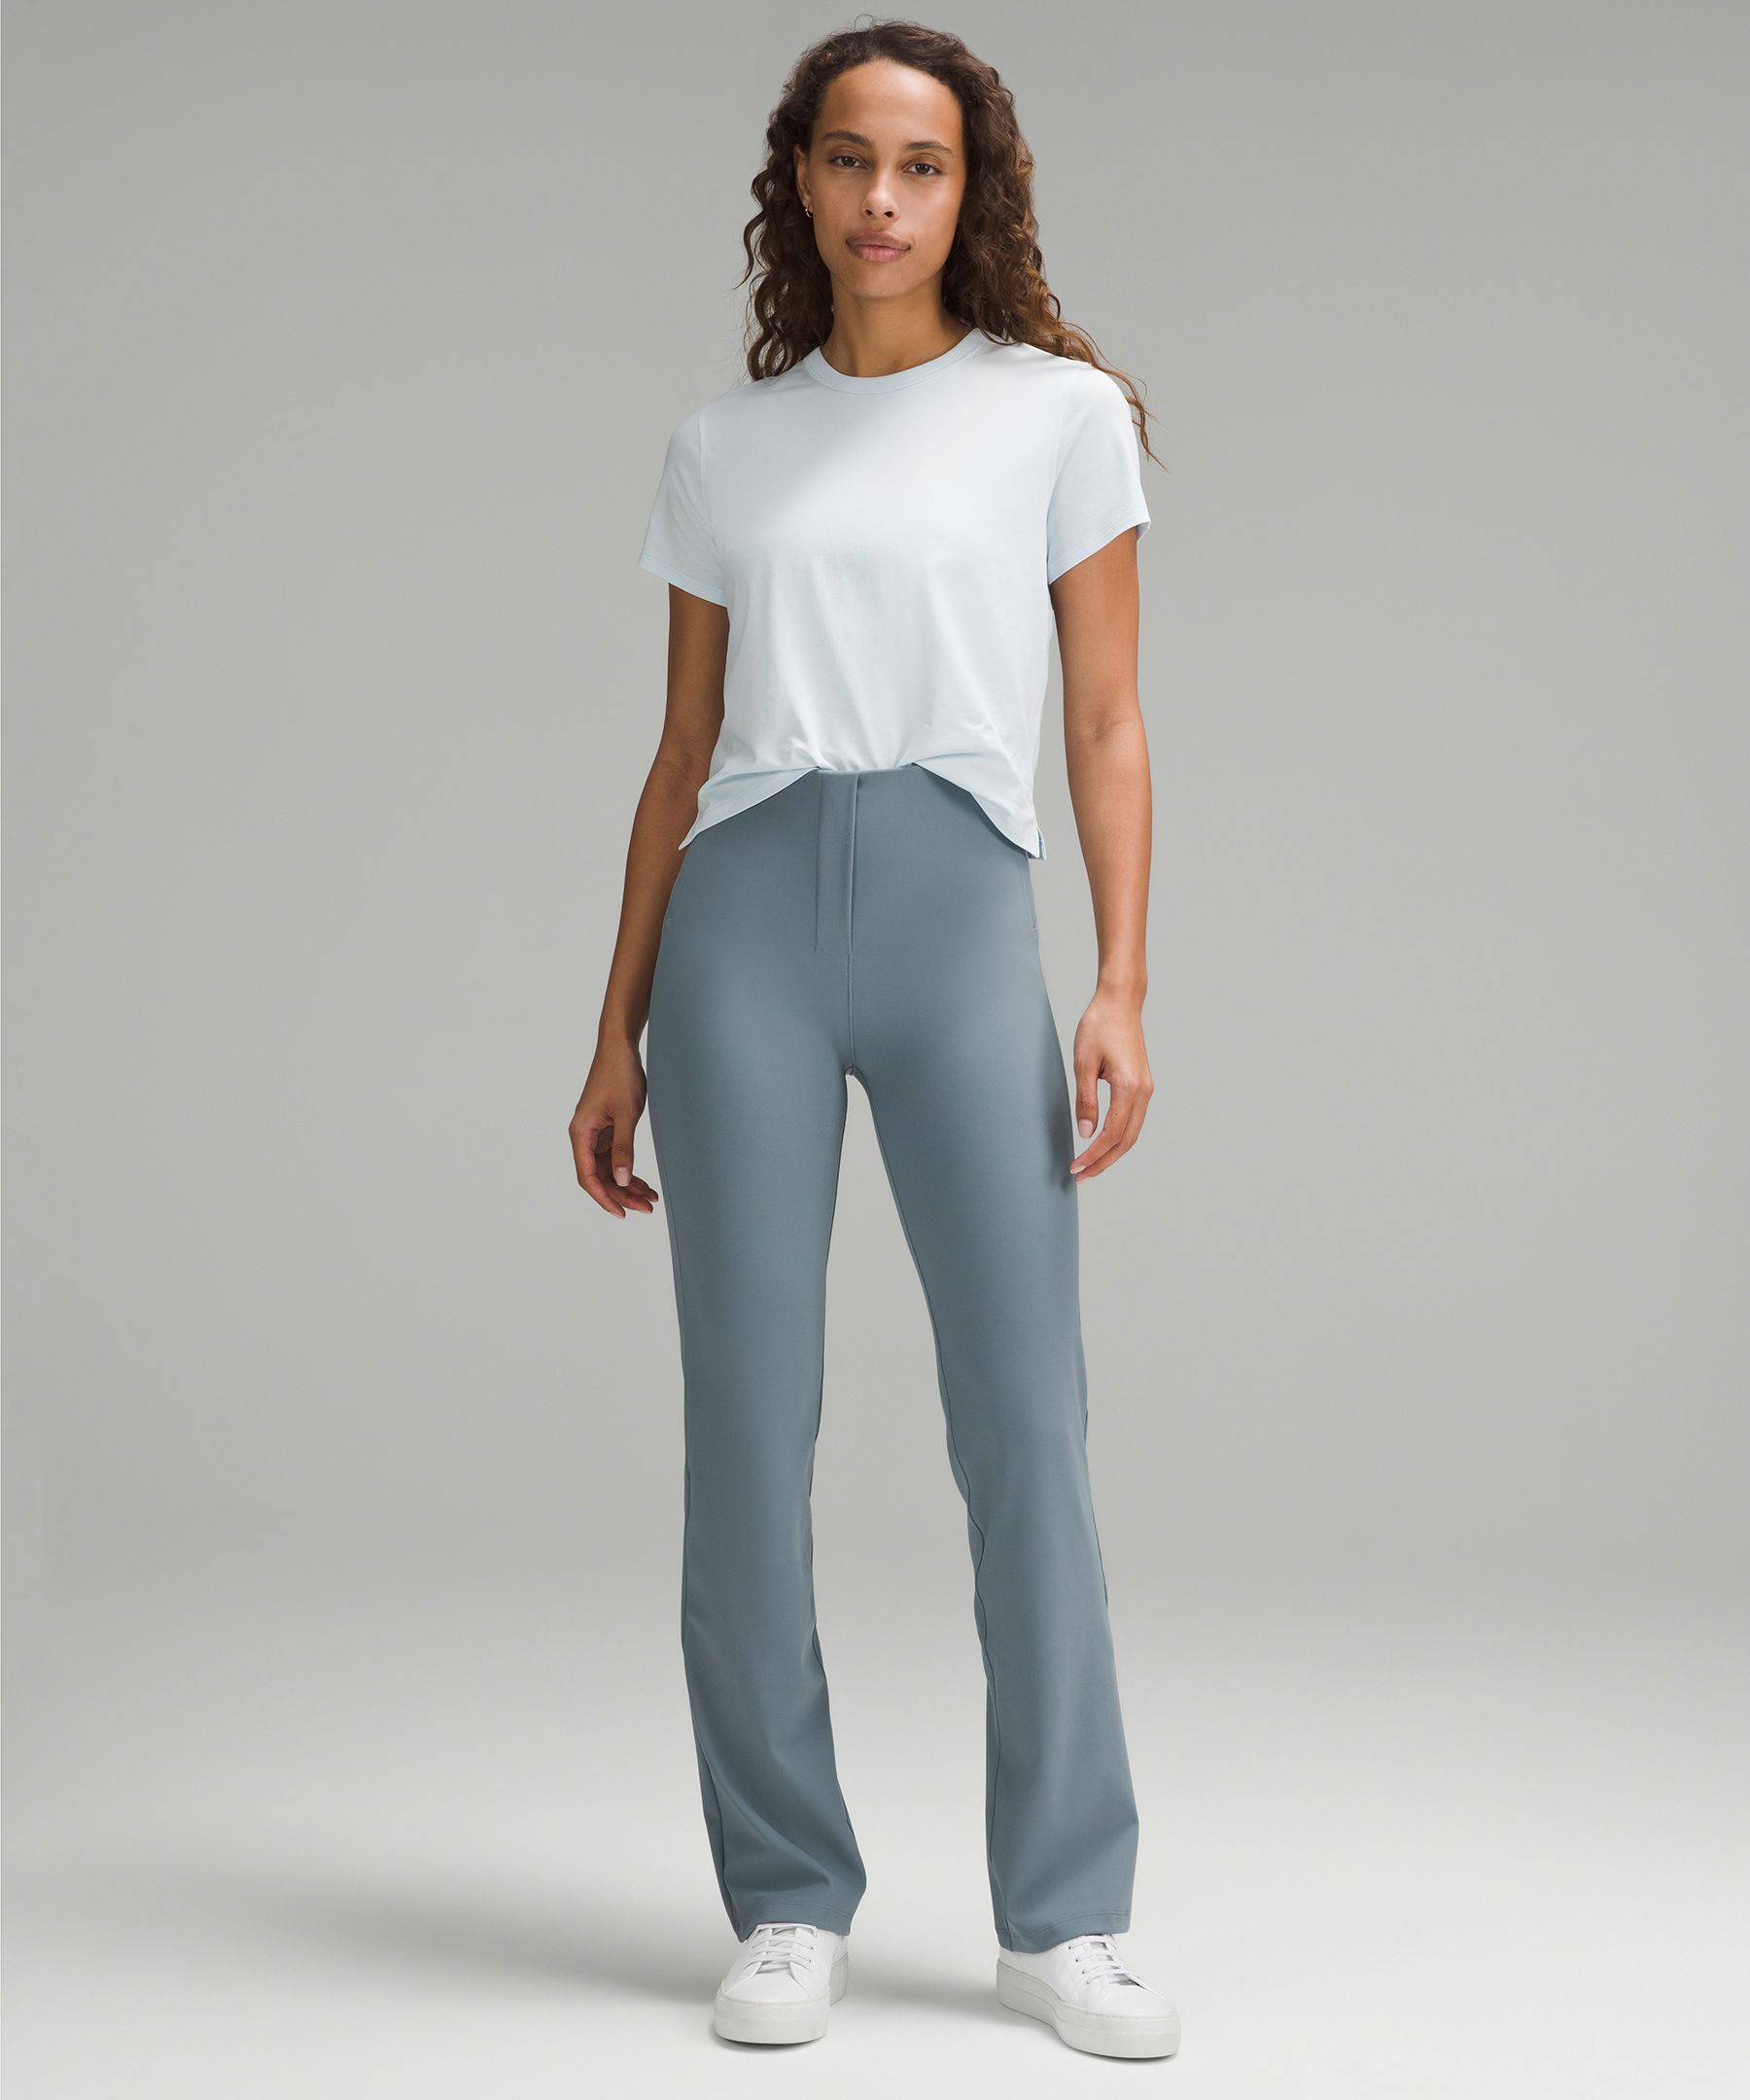 Smooth Fit Pull-On High-Rise Pant *Tall